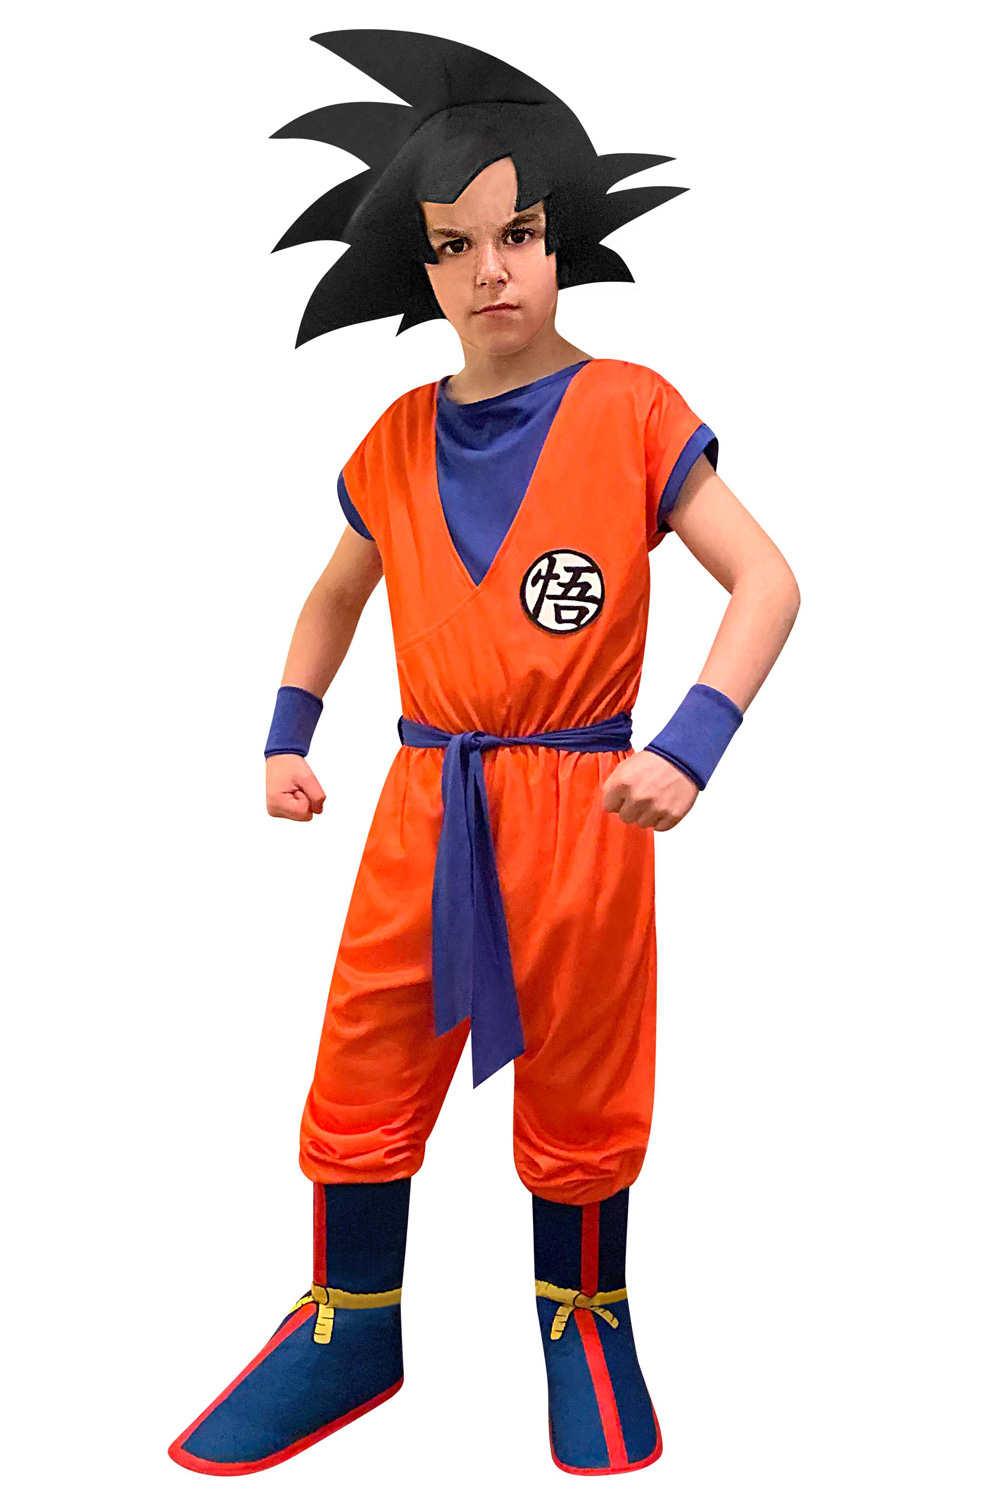 Counting insects syllable rash Dragon Ball Super Deluxe Goku Child Costume - PureCostumes.com